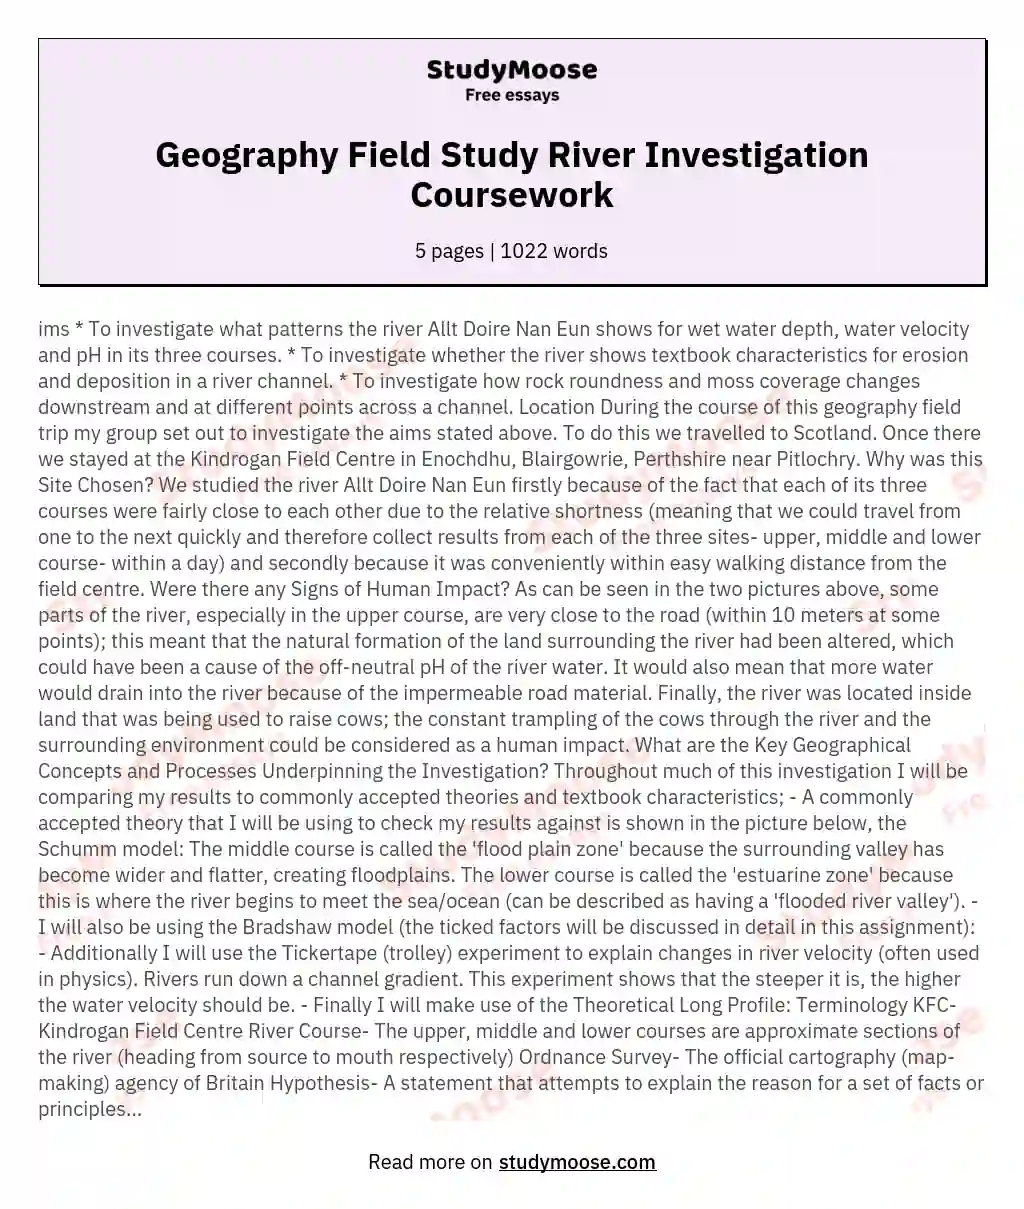 Geography Field Study River Investigation Coursework